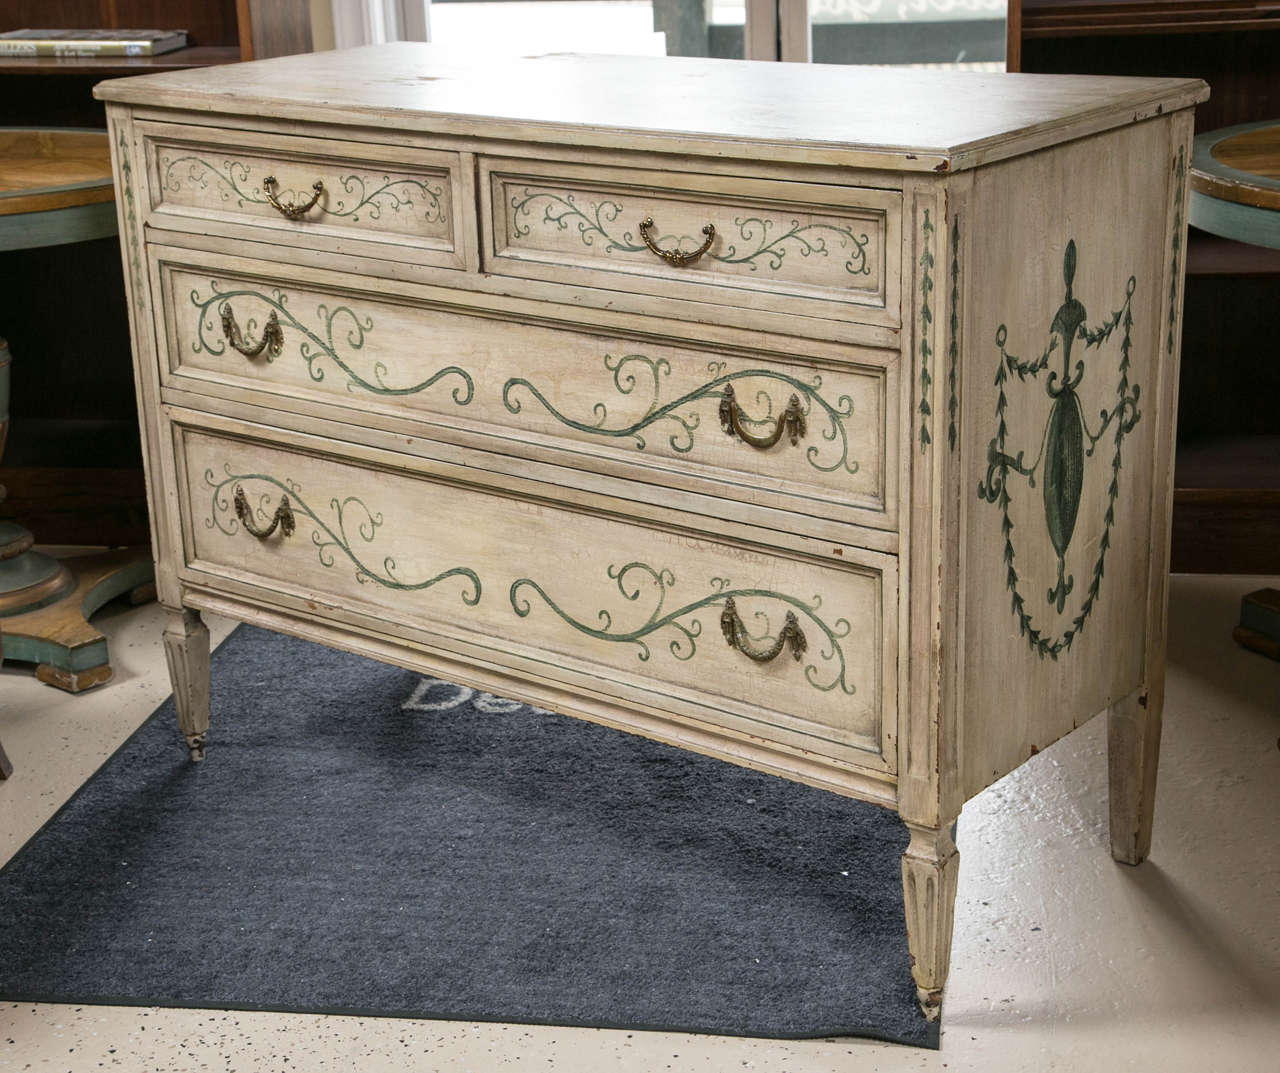 Adams style paint-decorated commode. Two smaller drawers atop two larger drawers. Each designed with scroll like blue/green vines. This masterful painted Adams Style Commode is finished in a warm cream color and decorated with a beautiful blue/green